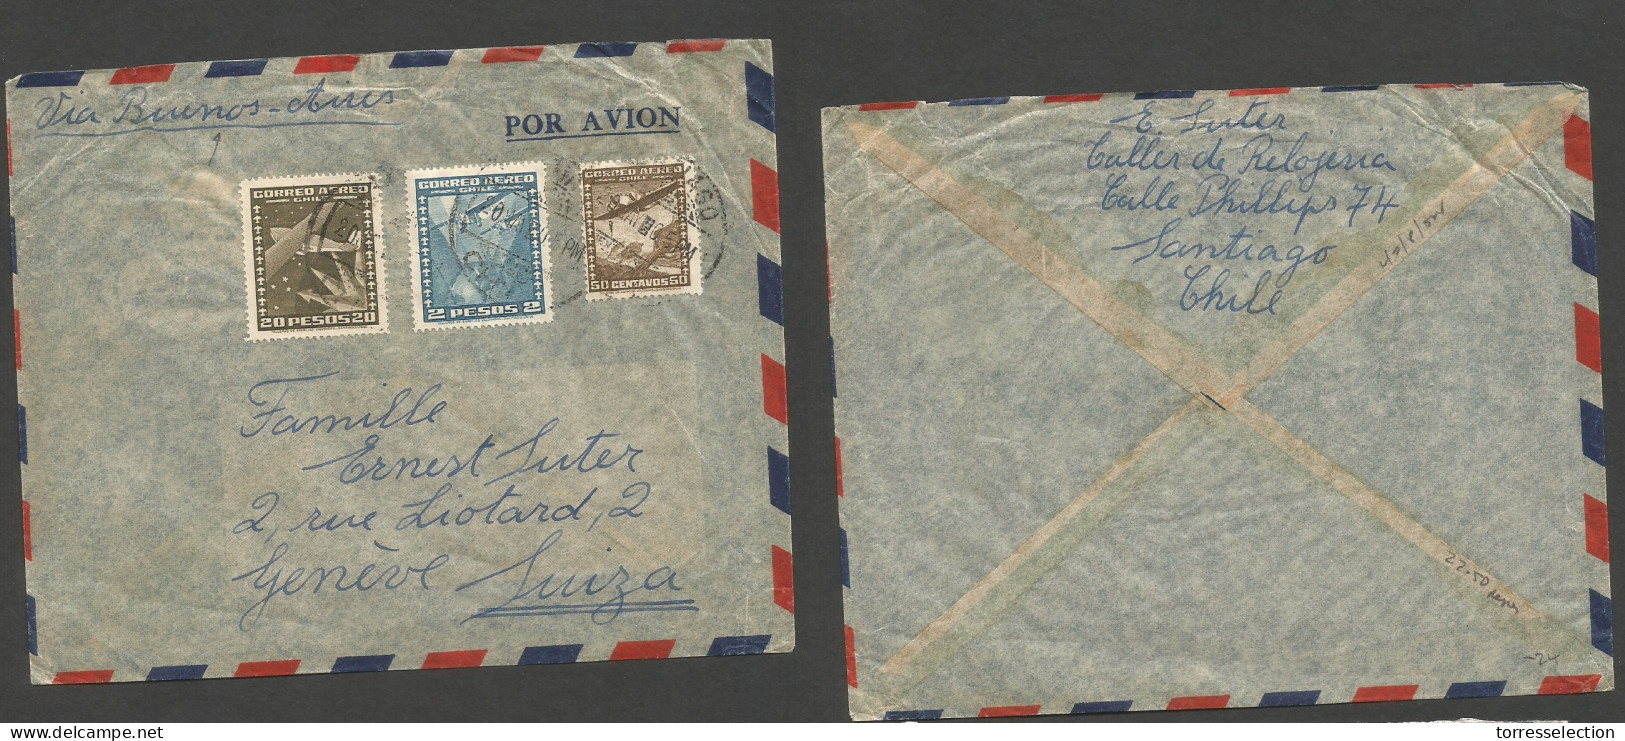 Chile - XX. 1930 (20 May) Stgo - Switzerland, Geneve Via Buenos Aires. Air Multifkd Env At 22,50 Pesos Rate. XSALE. - Chile